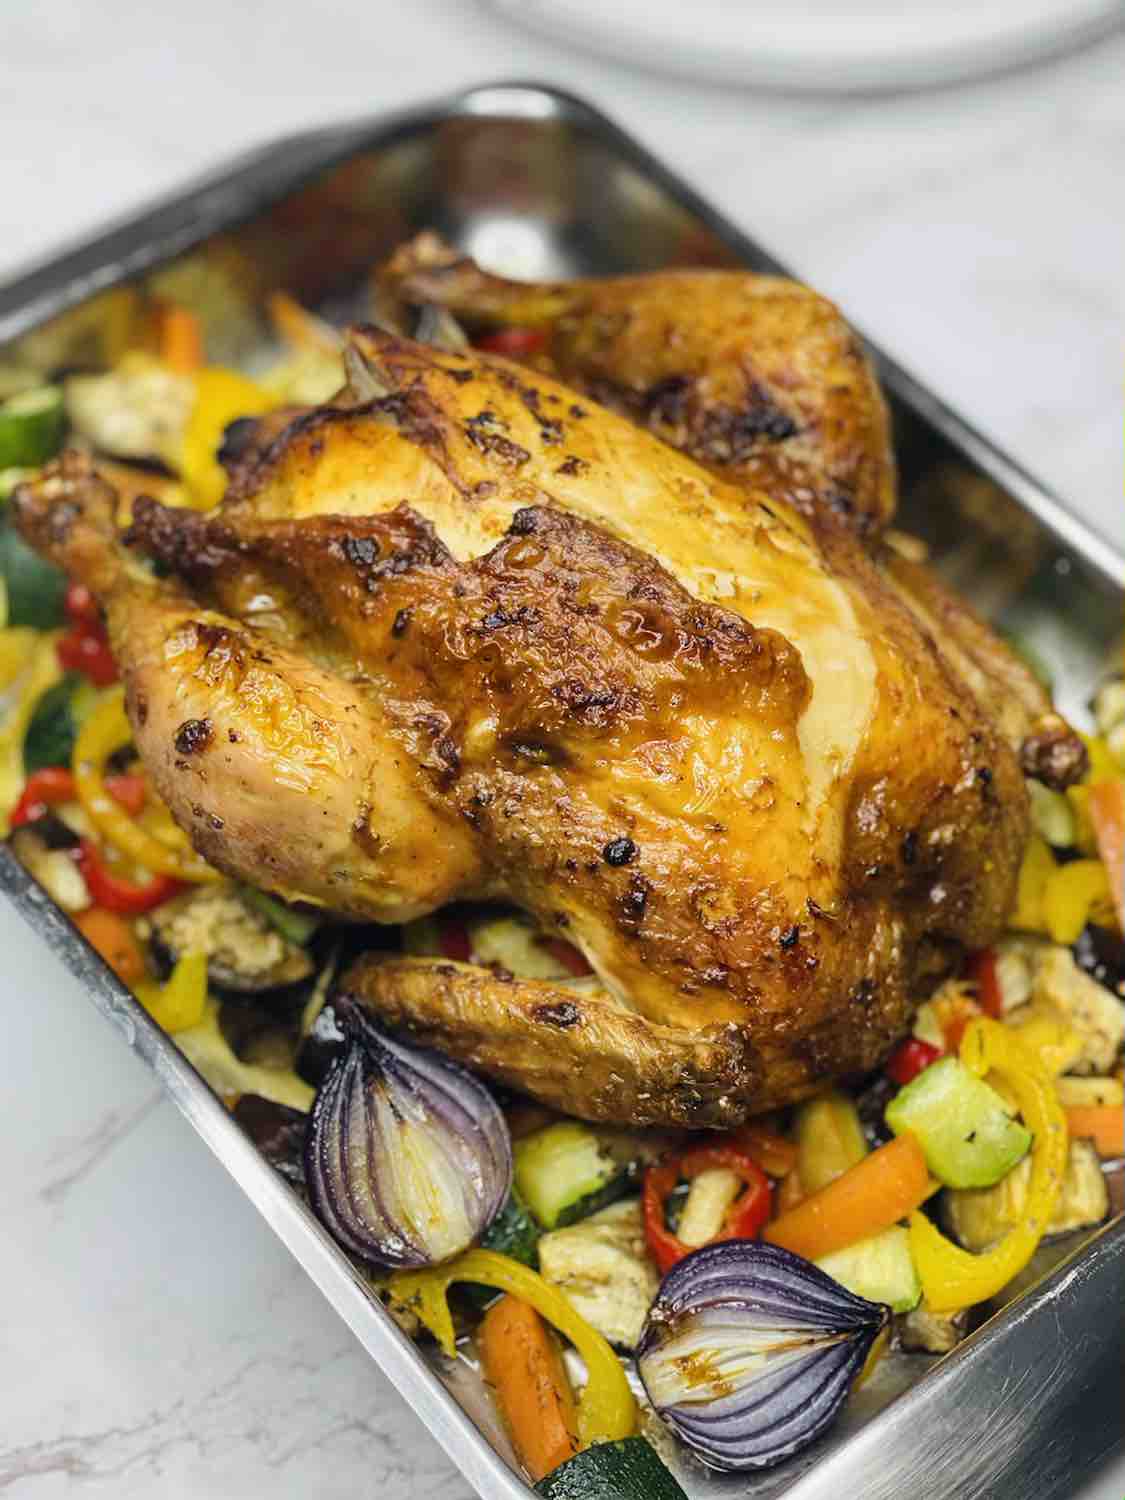 A whole roast chicken with vegetables on a baking tray.